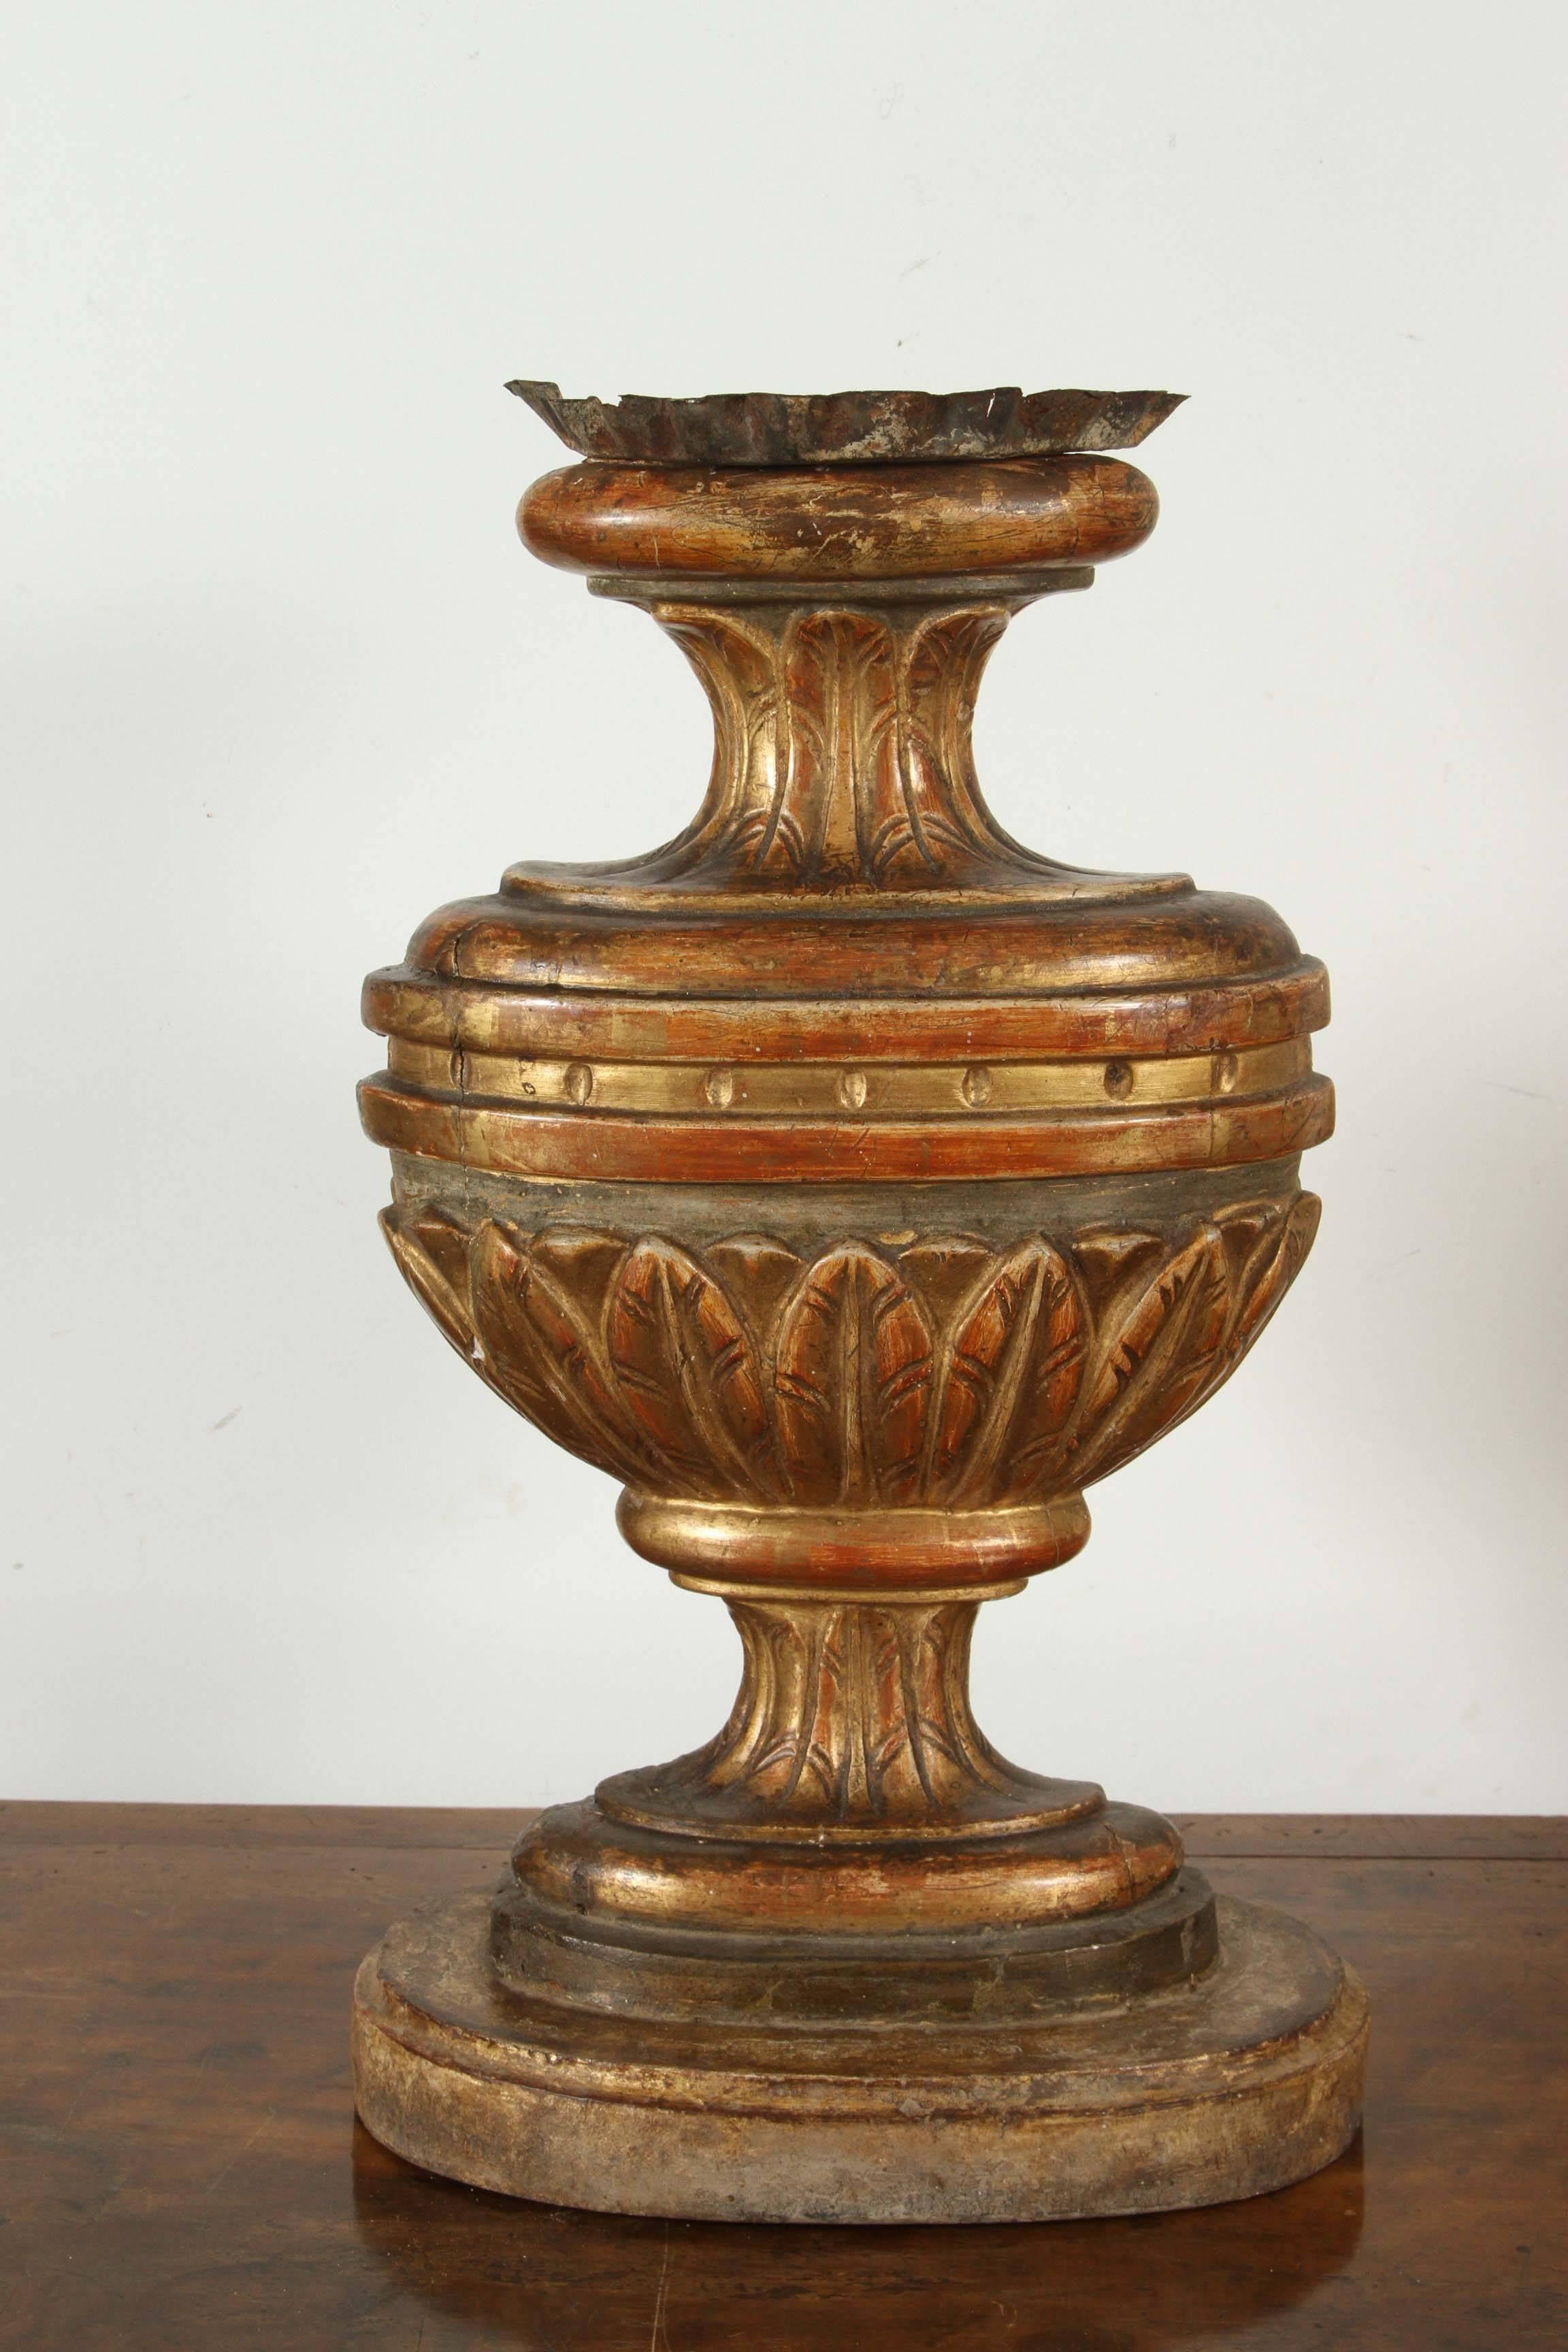 Pair of carved, hand-painted, gessoed and gold gilded, oval candlesticks with acanthus leaf details.